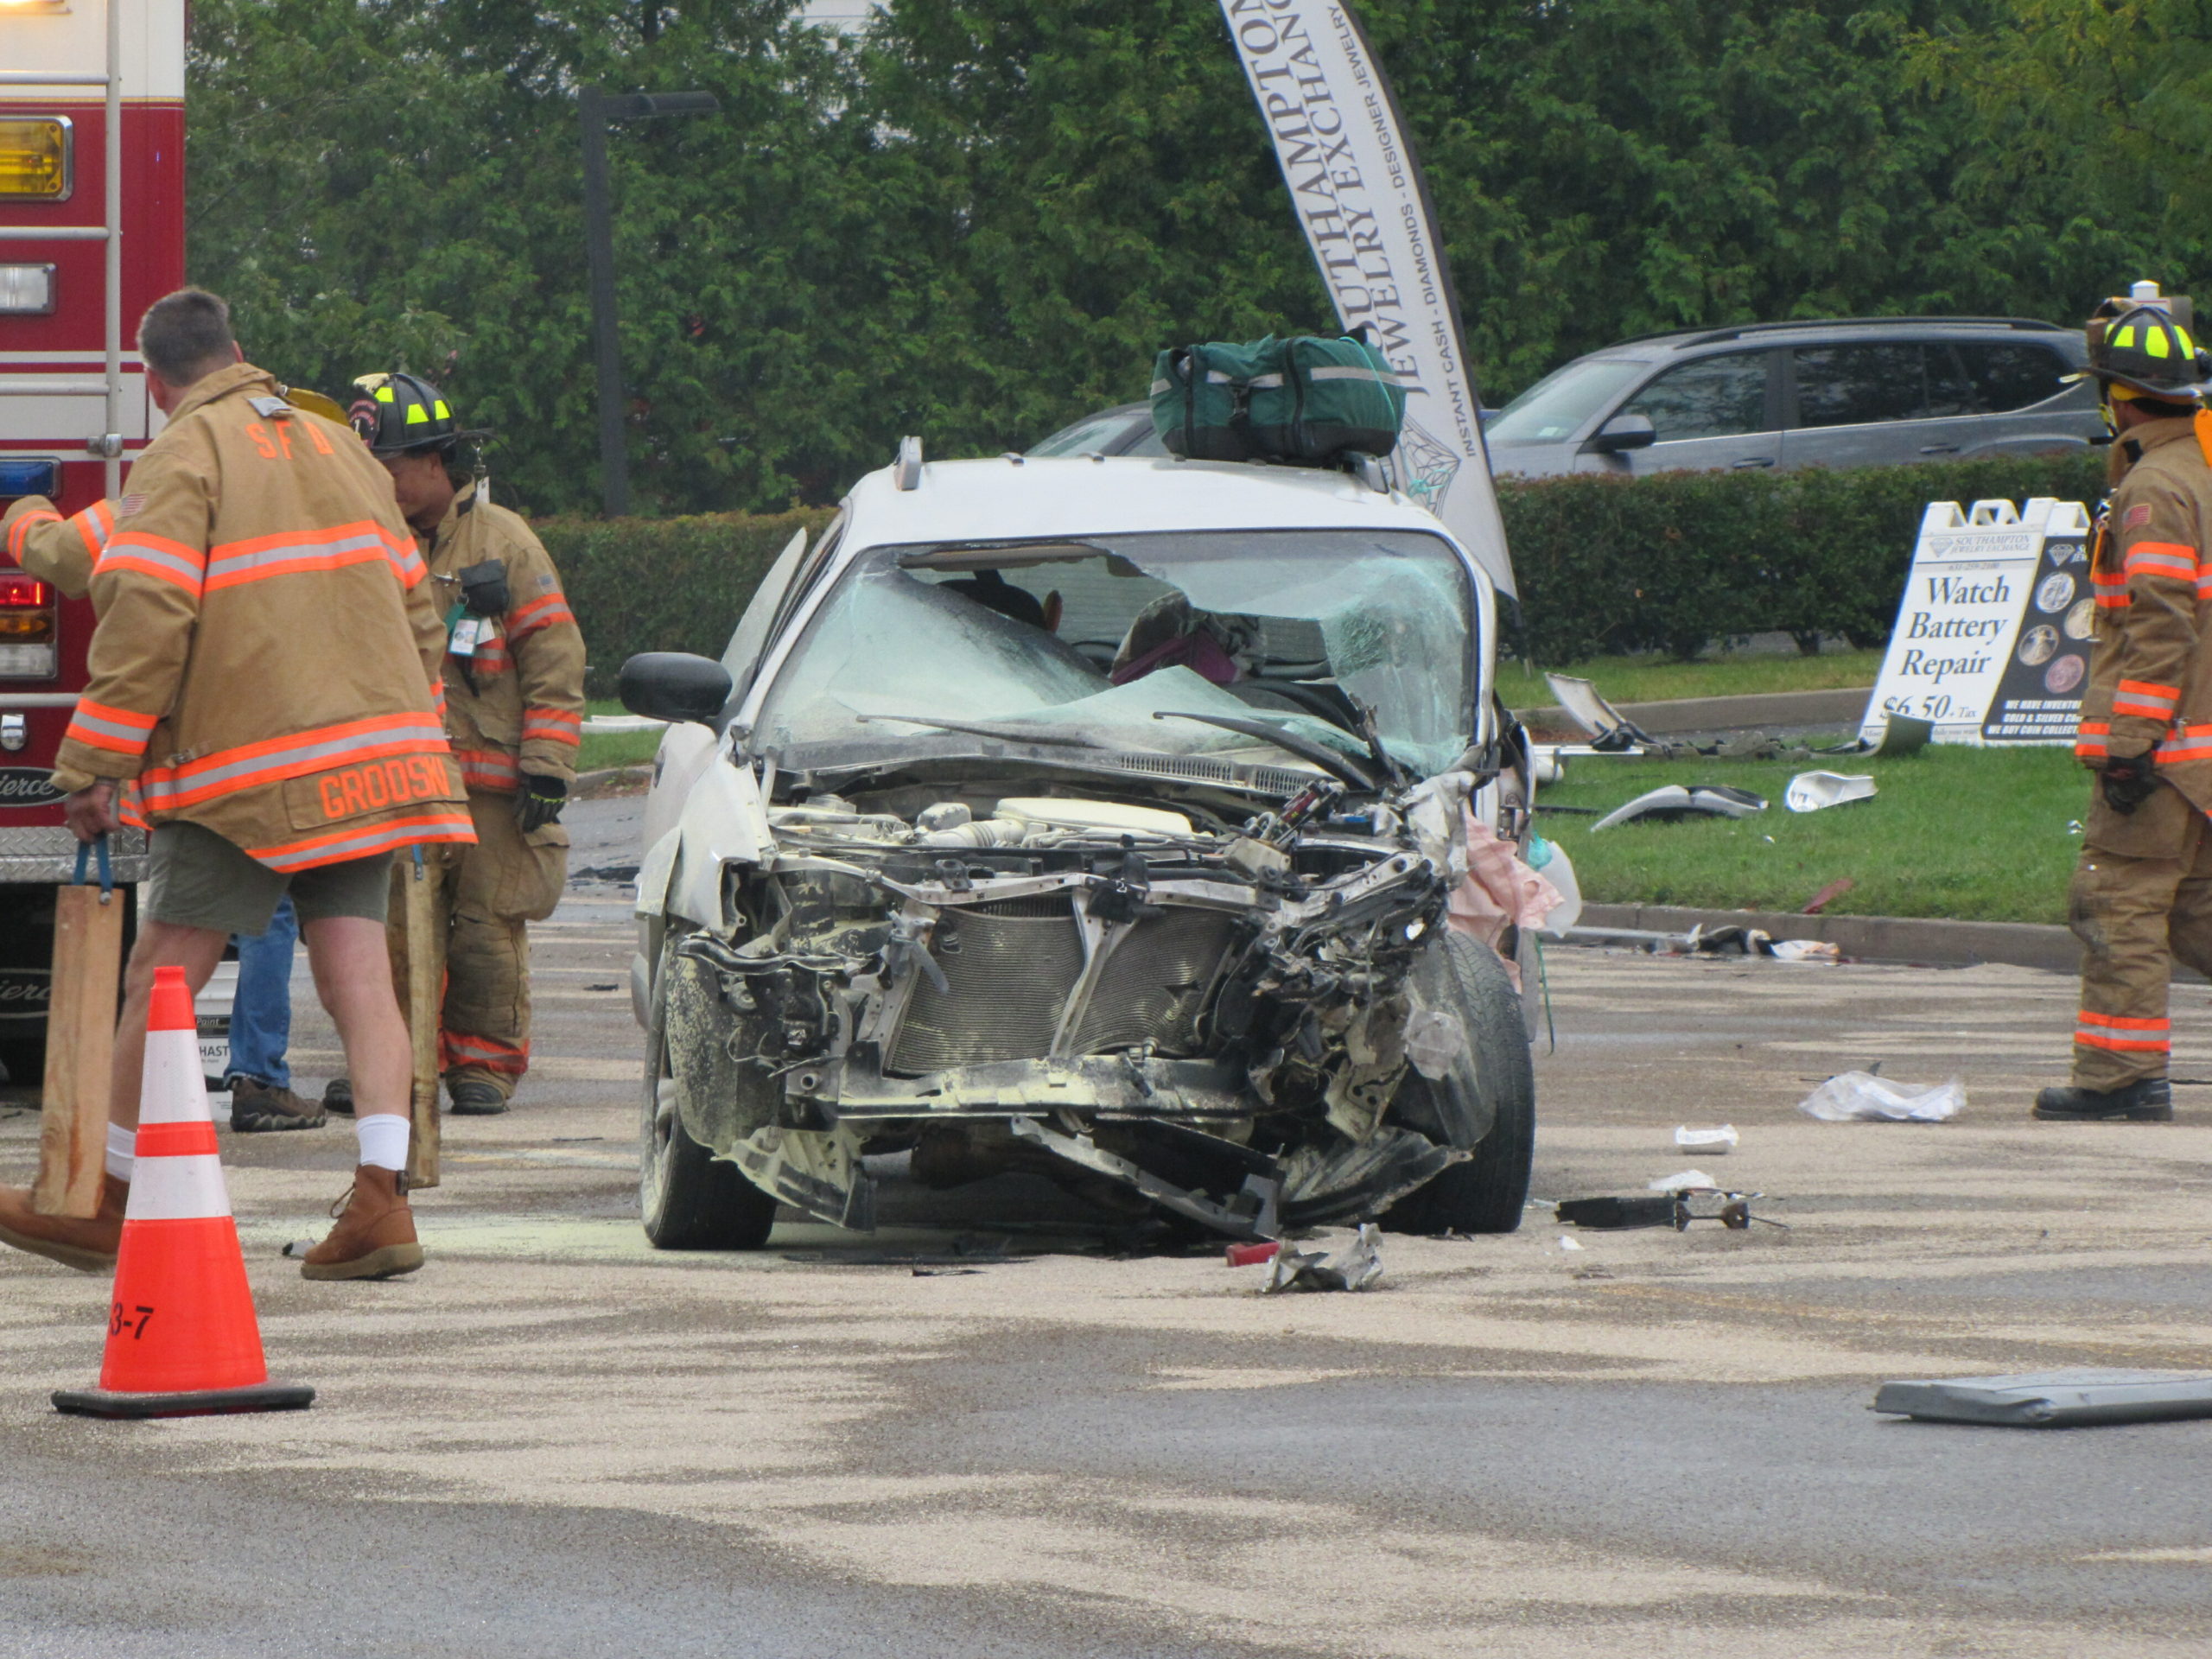 A multi-vehicle crash closed CR39 on Monday morning and sent at least two people to the hospital.